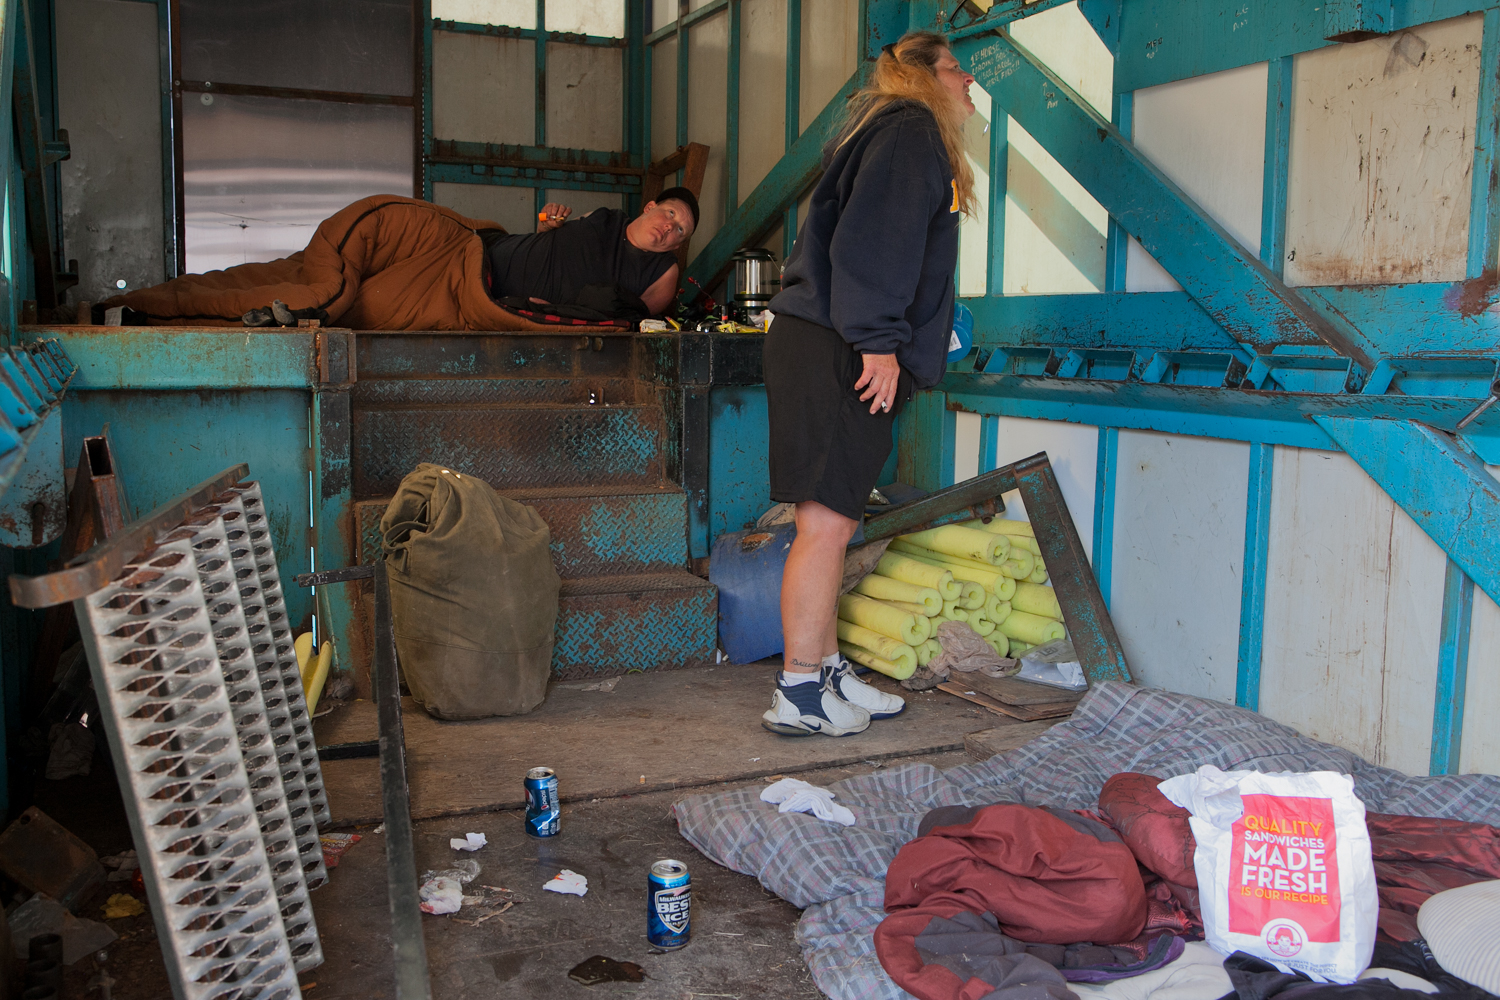  Two carnival workers awake and rise. This is the belly of the tractor-trailer that transports the Merry-Go-Round. After rides are erected, workers oftentimes use the trailers as shelter. 